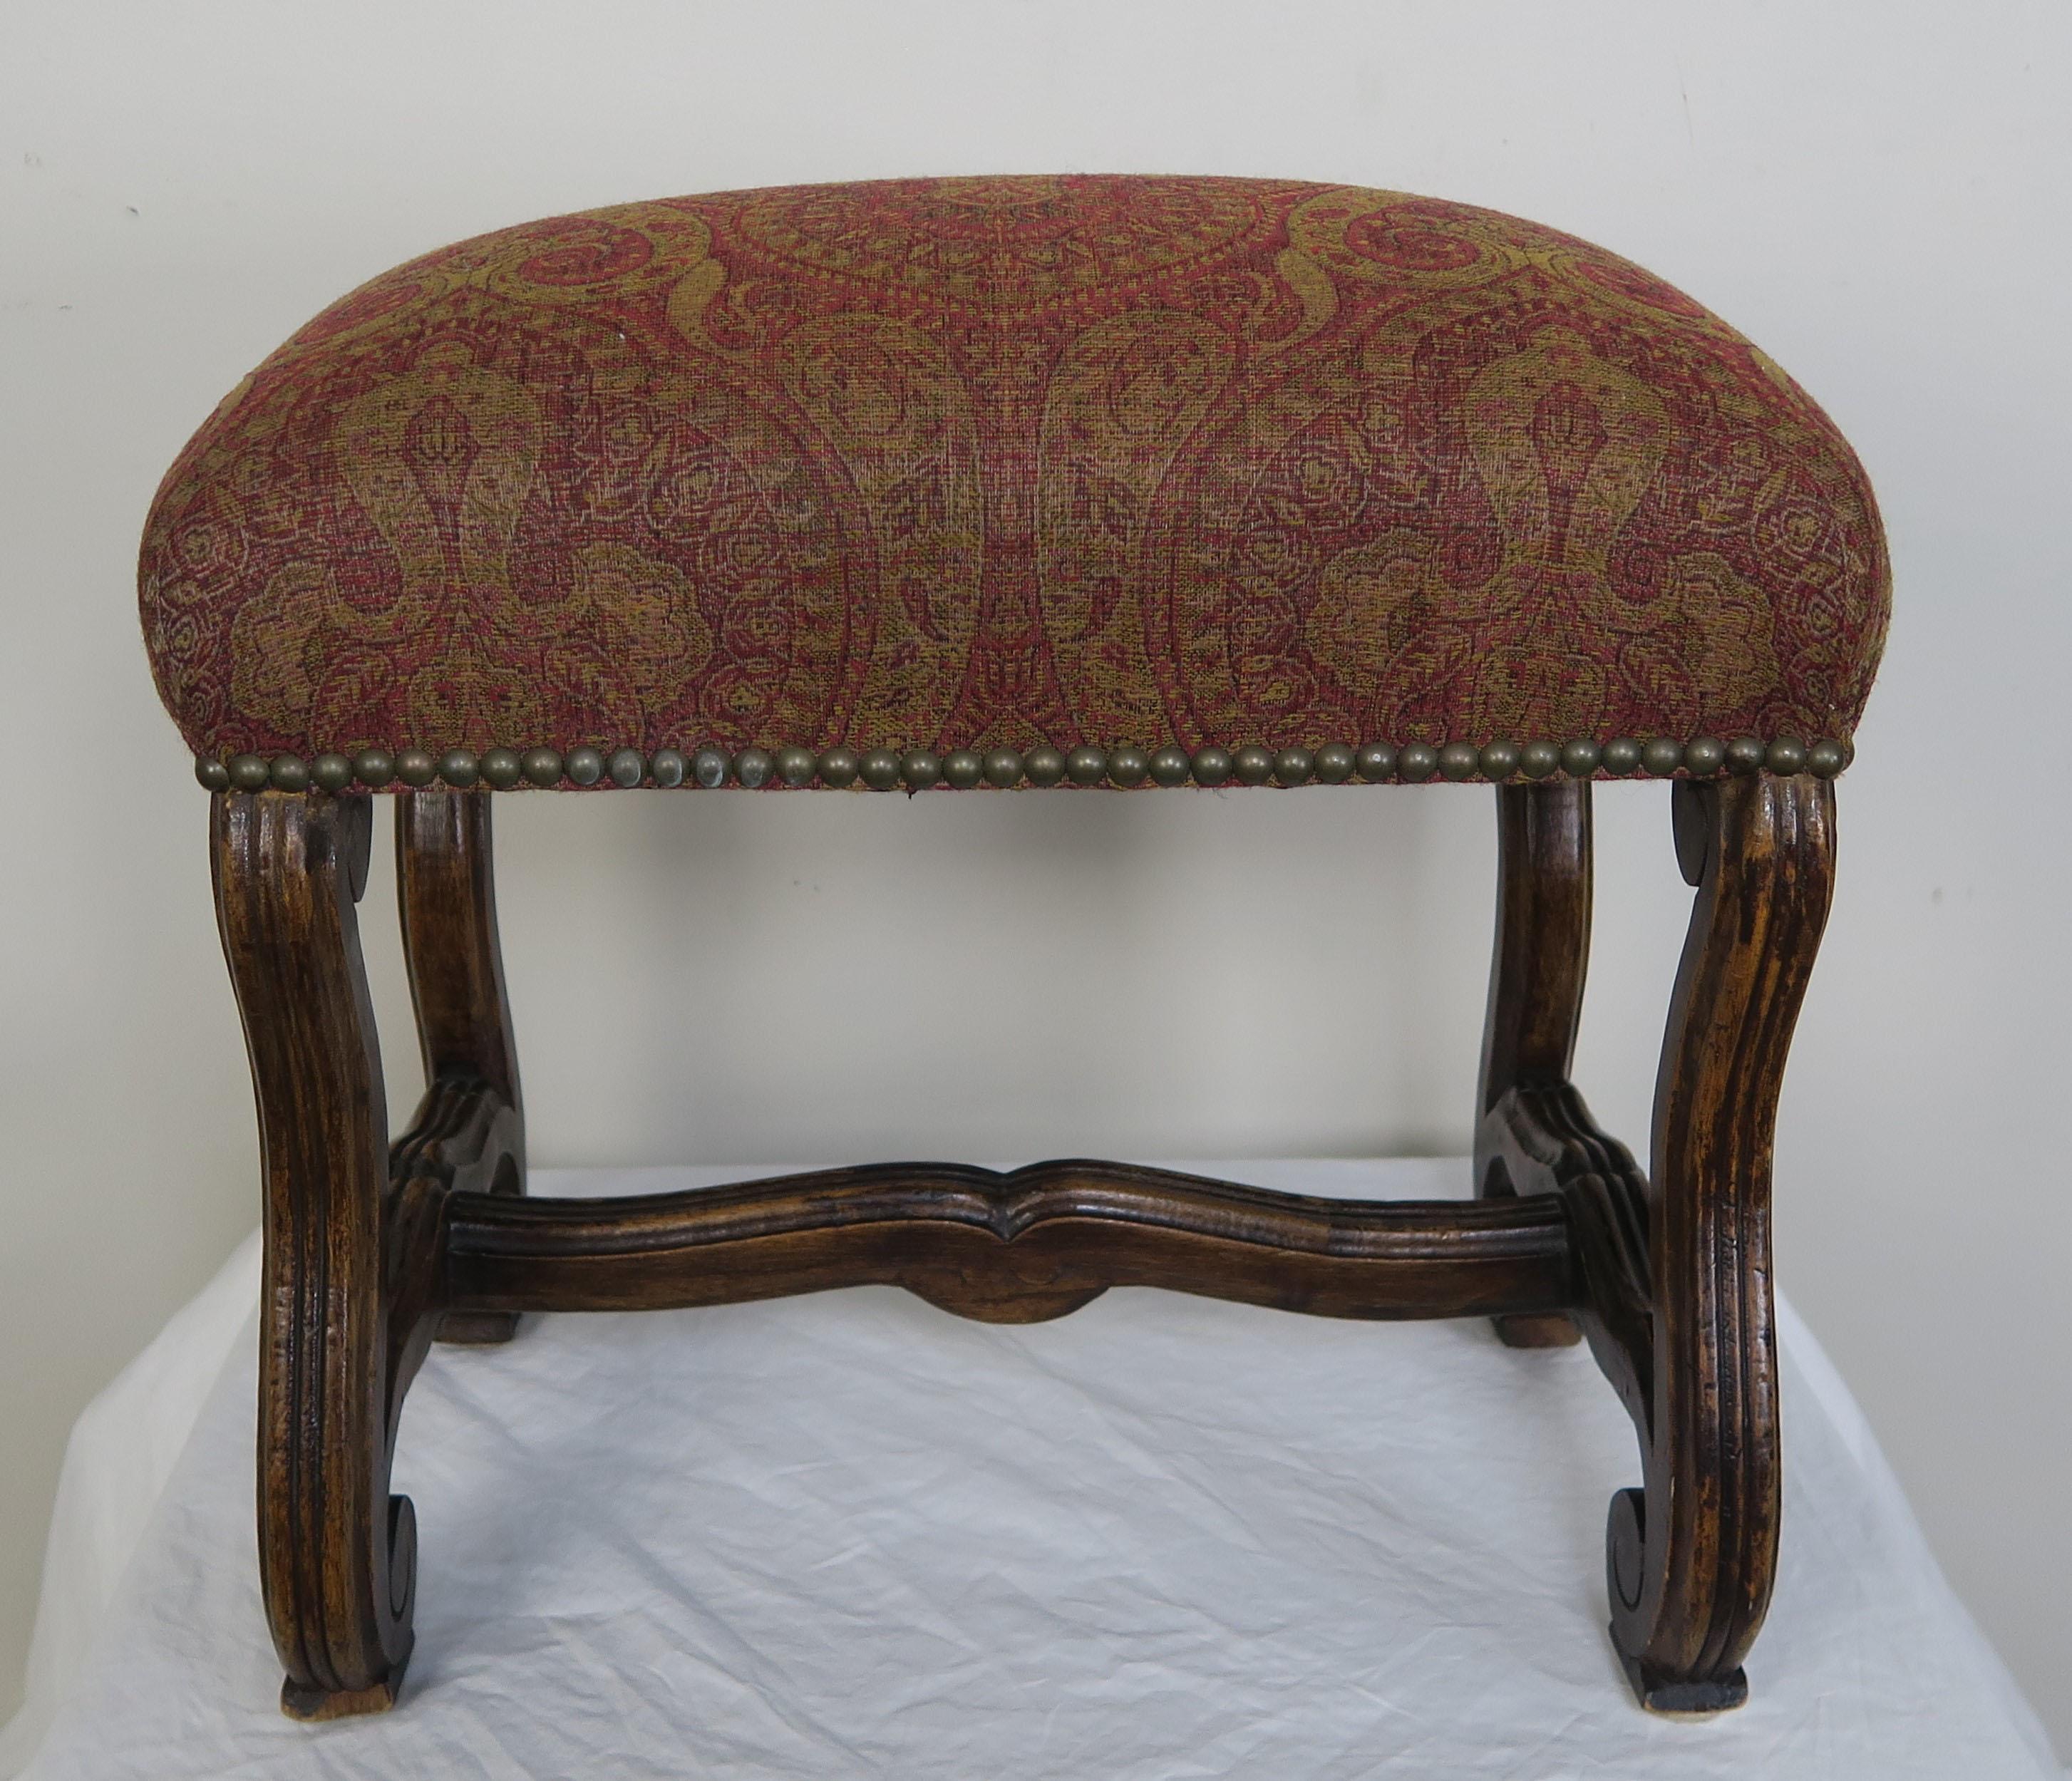 Spanish carved walnut bench upholstered in a paisley wool with antique brass nailhead trim detail.